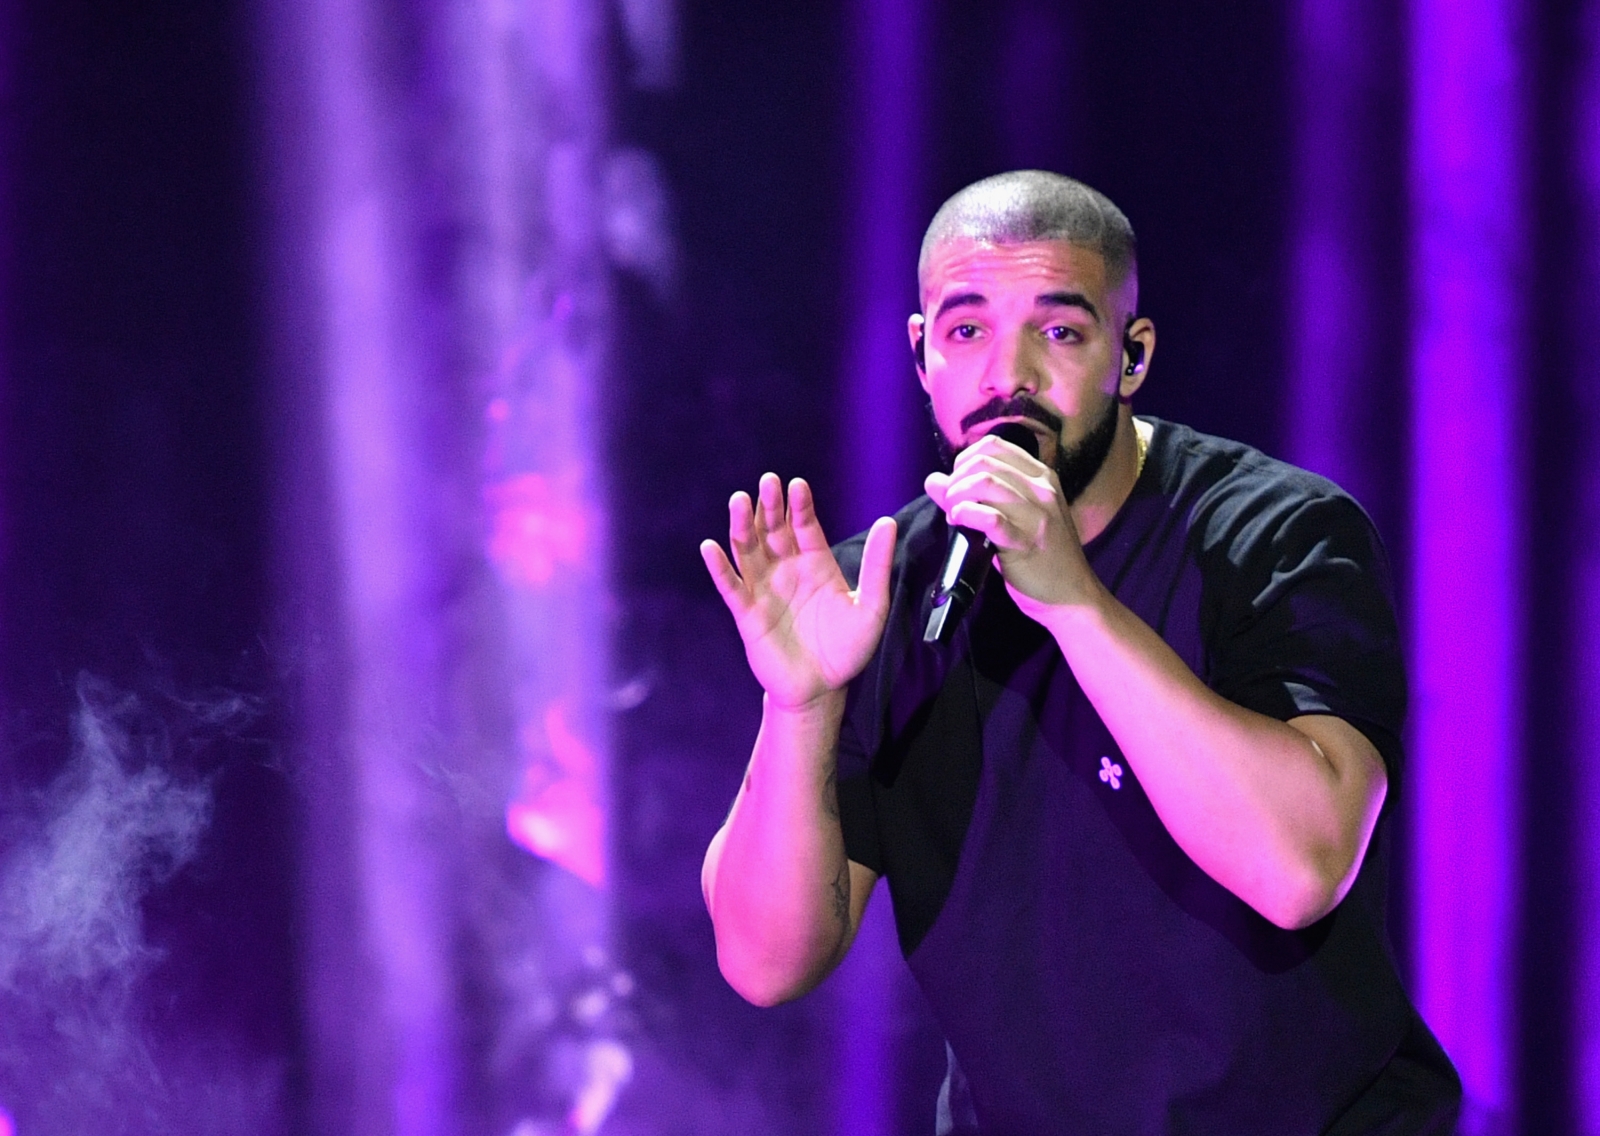 Drake returns to Amsterdam stage after food poisoning: 'One of the worst nights of my life'